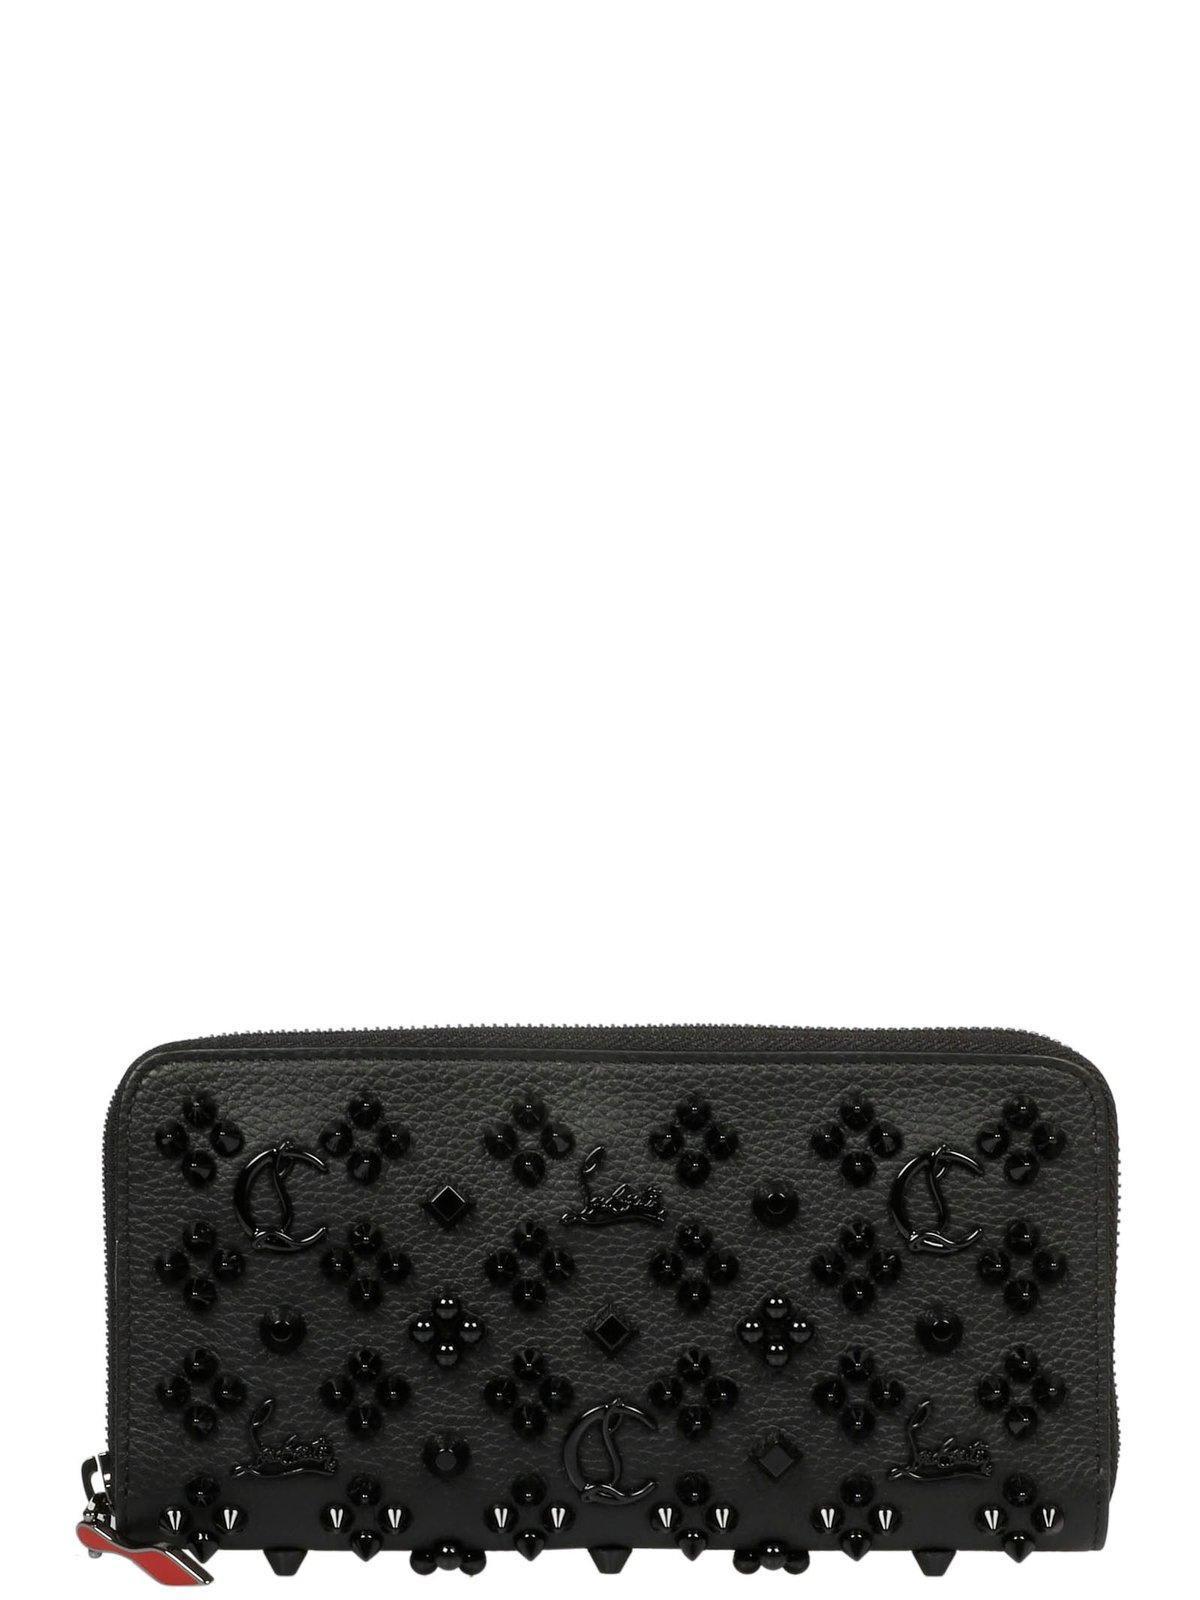 Christian Louboutin Panettone Studded Zip-around Wallet in Black